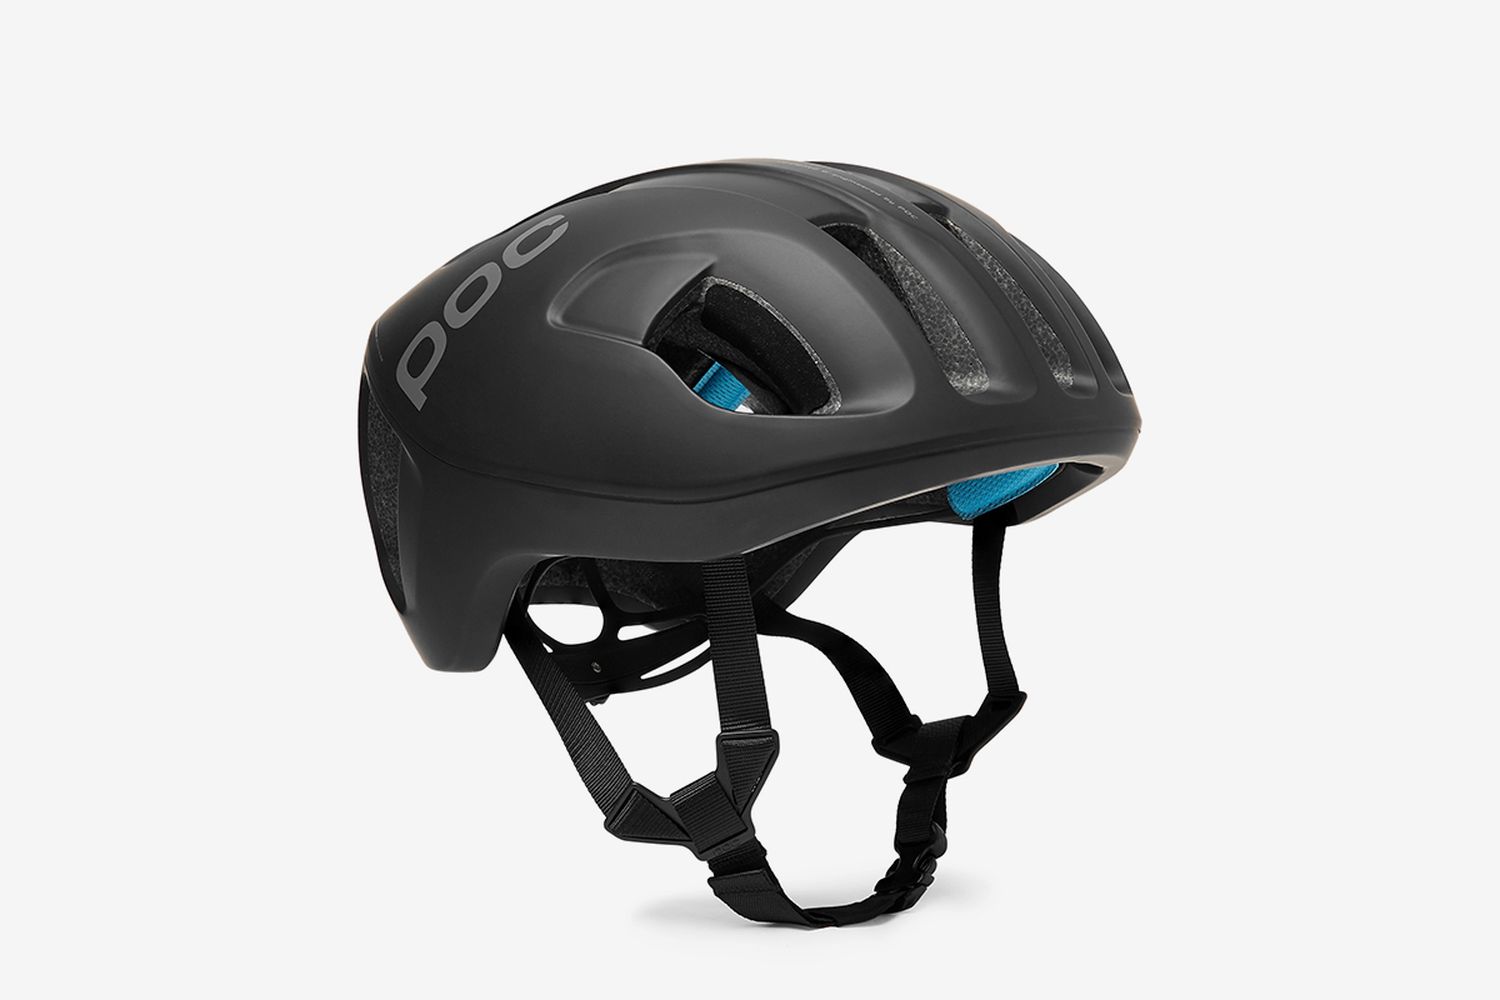 Ventral Spin Cycling Helmet